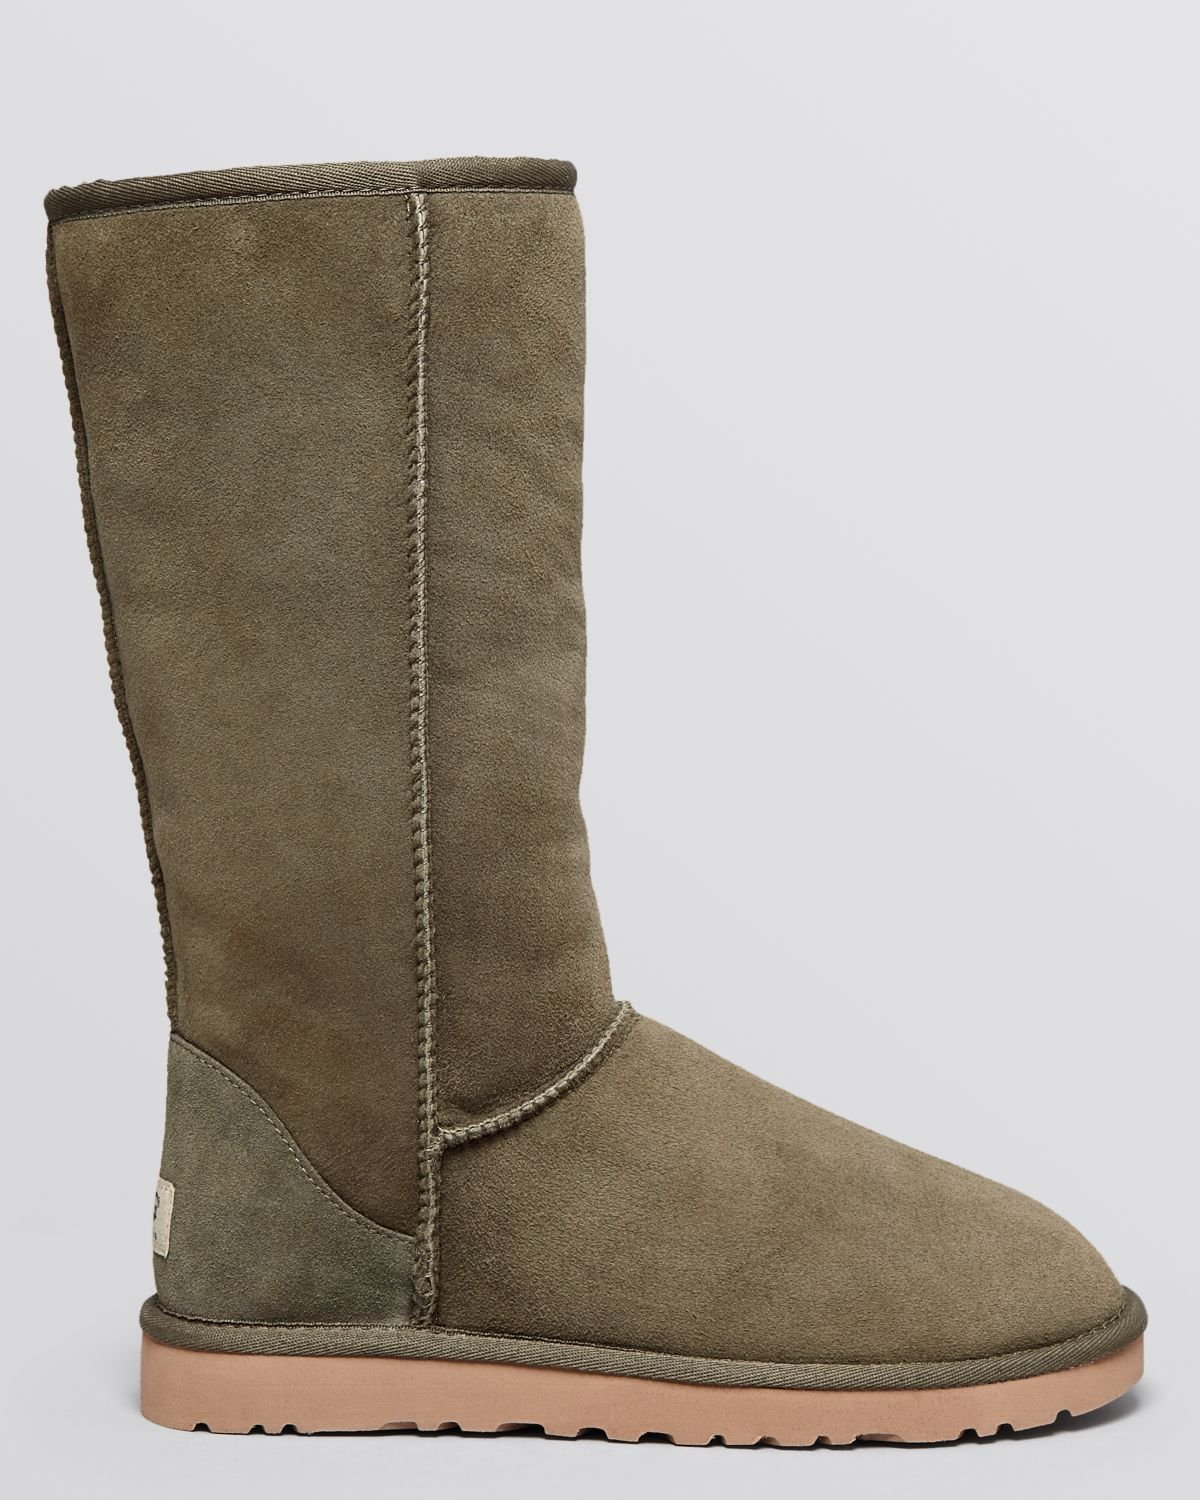 forest green ugg boots